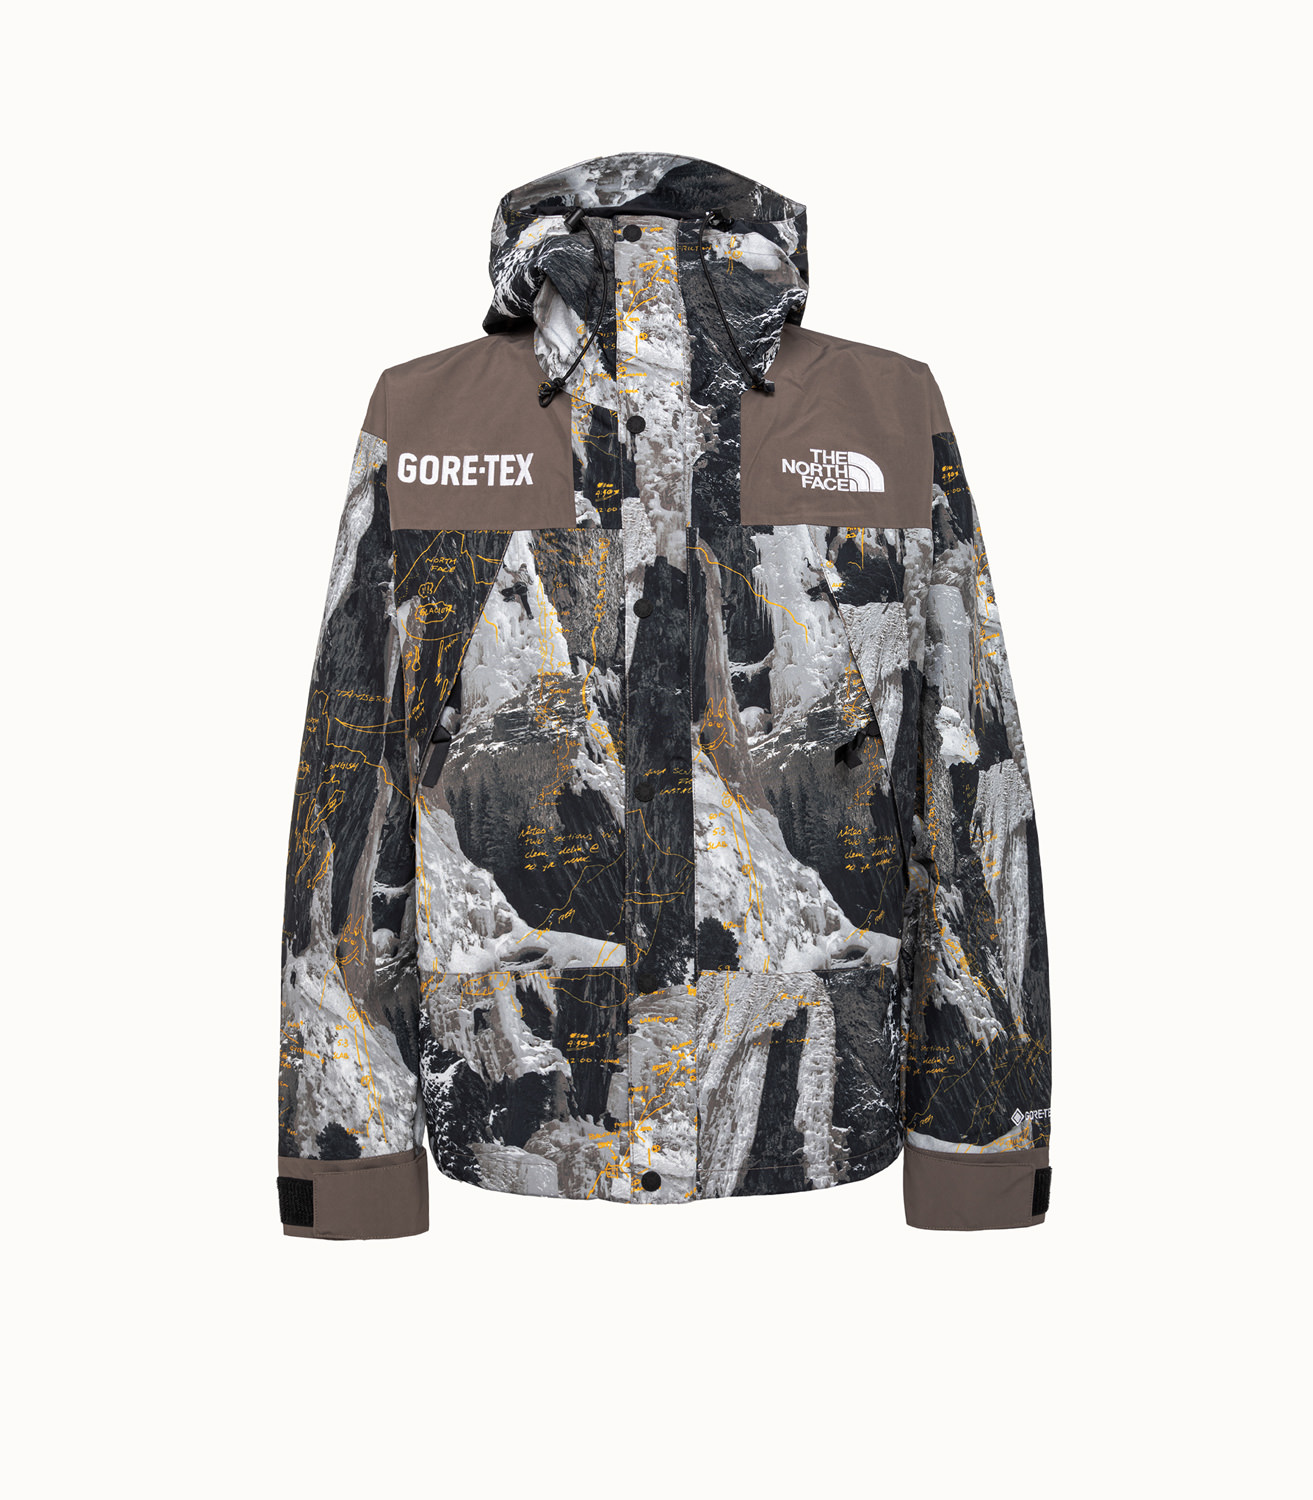 THE NORTH FACE GTX MOUNTAIN JACKET | Playground